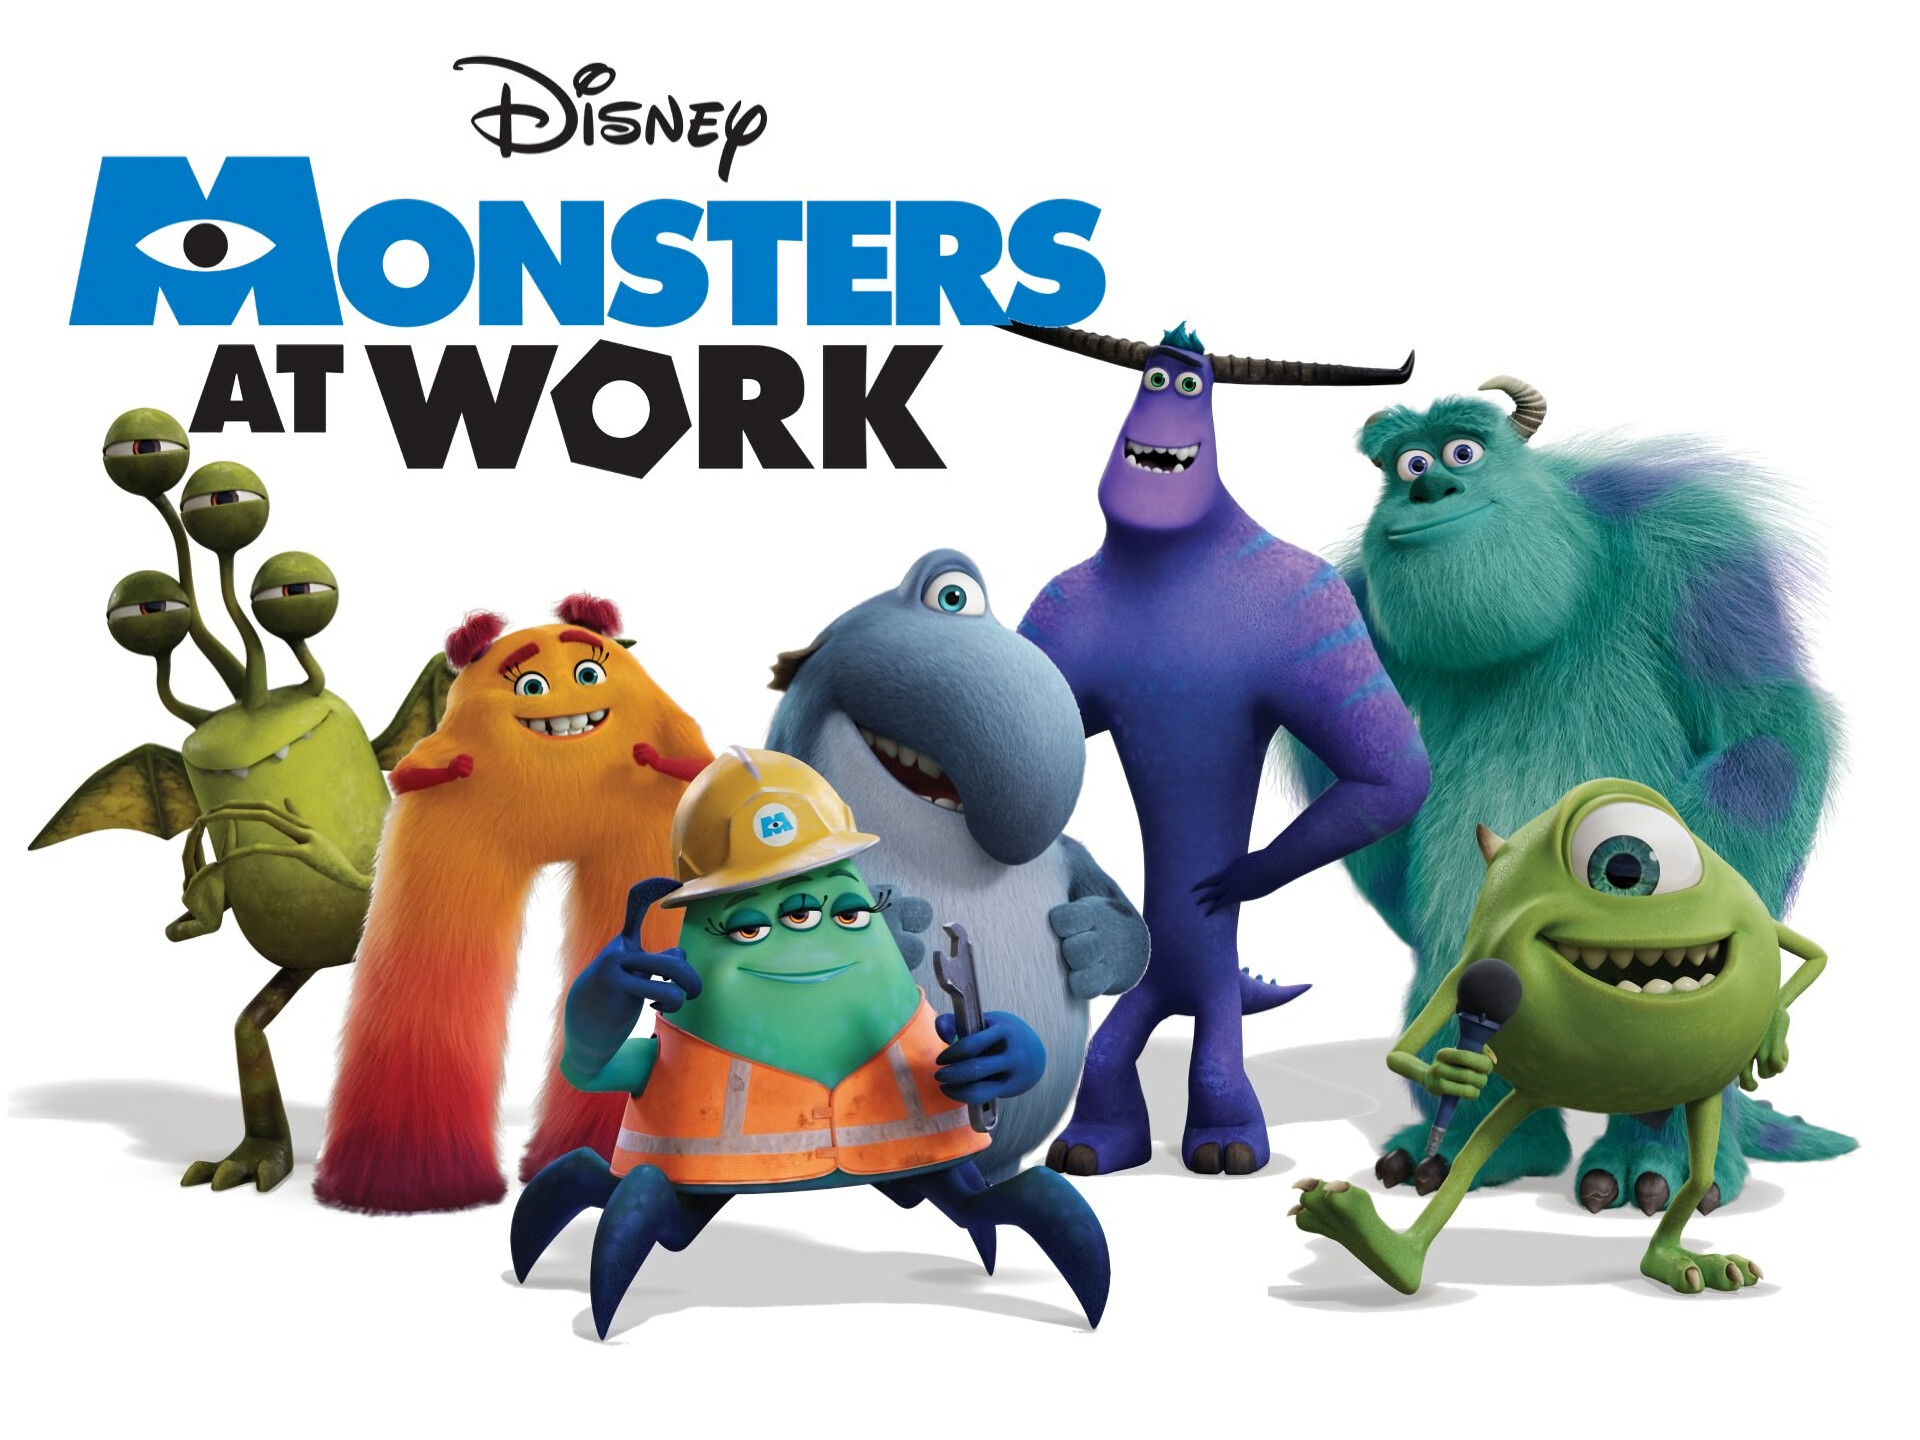 Monsters at Work: A Disney series, a direct continuation of the original 2001 film. 1920x1440 HD Wallpaper.